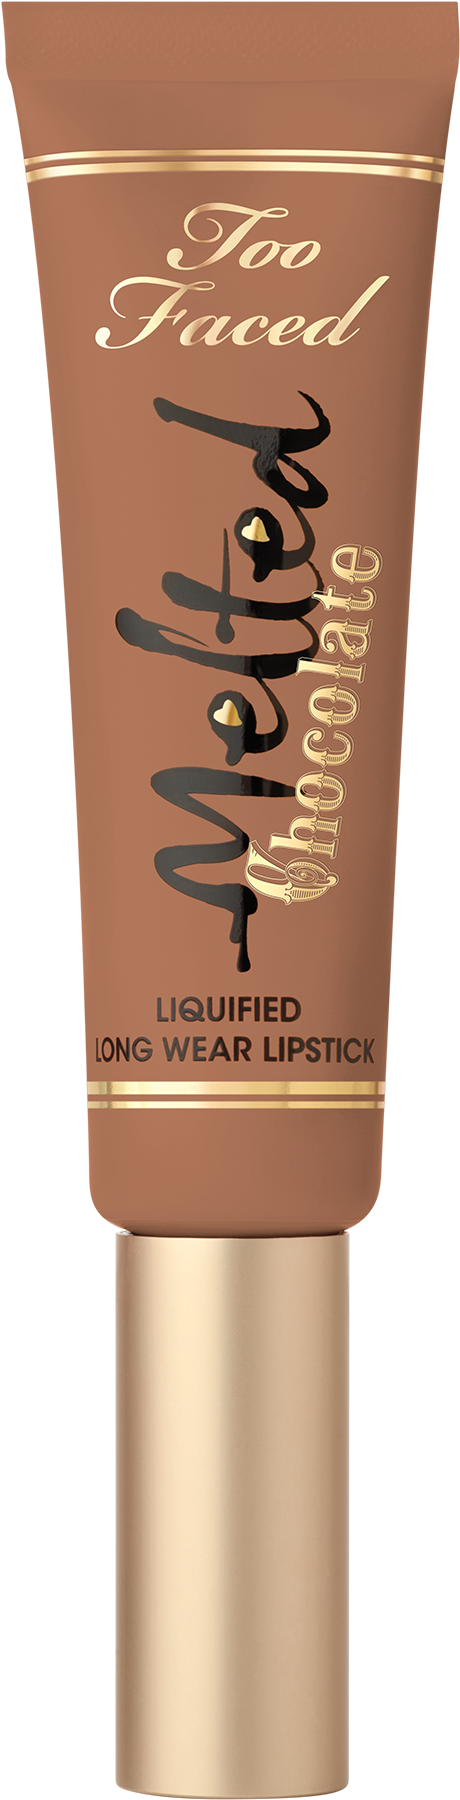 Melted - Too Faced Melted Lipsticks Chocolate Honey (2000x1800), Png Download